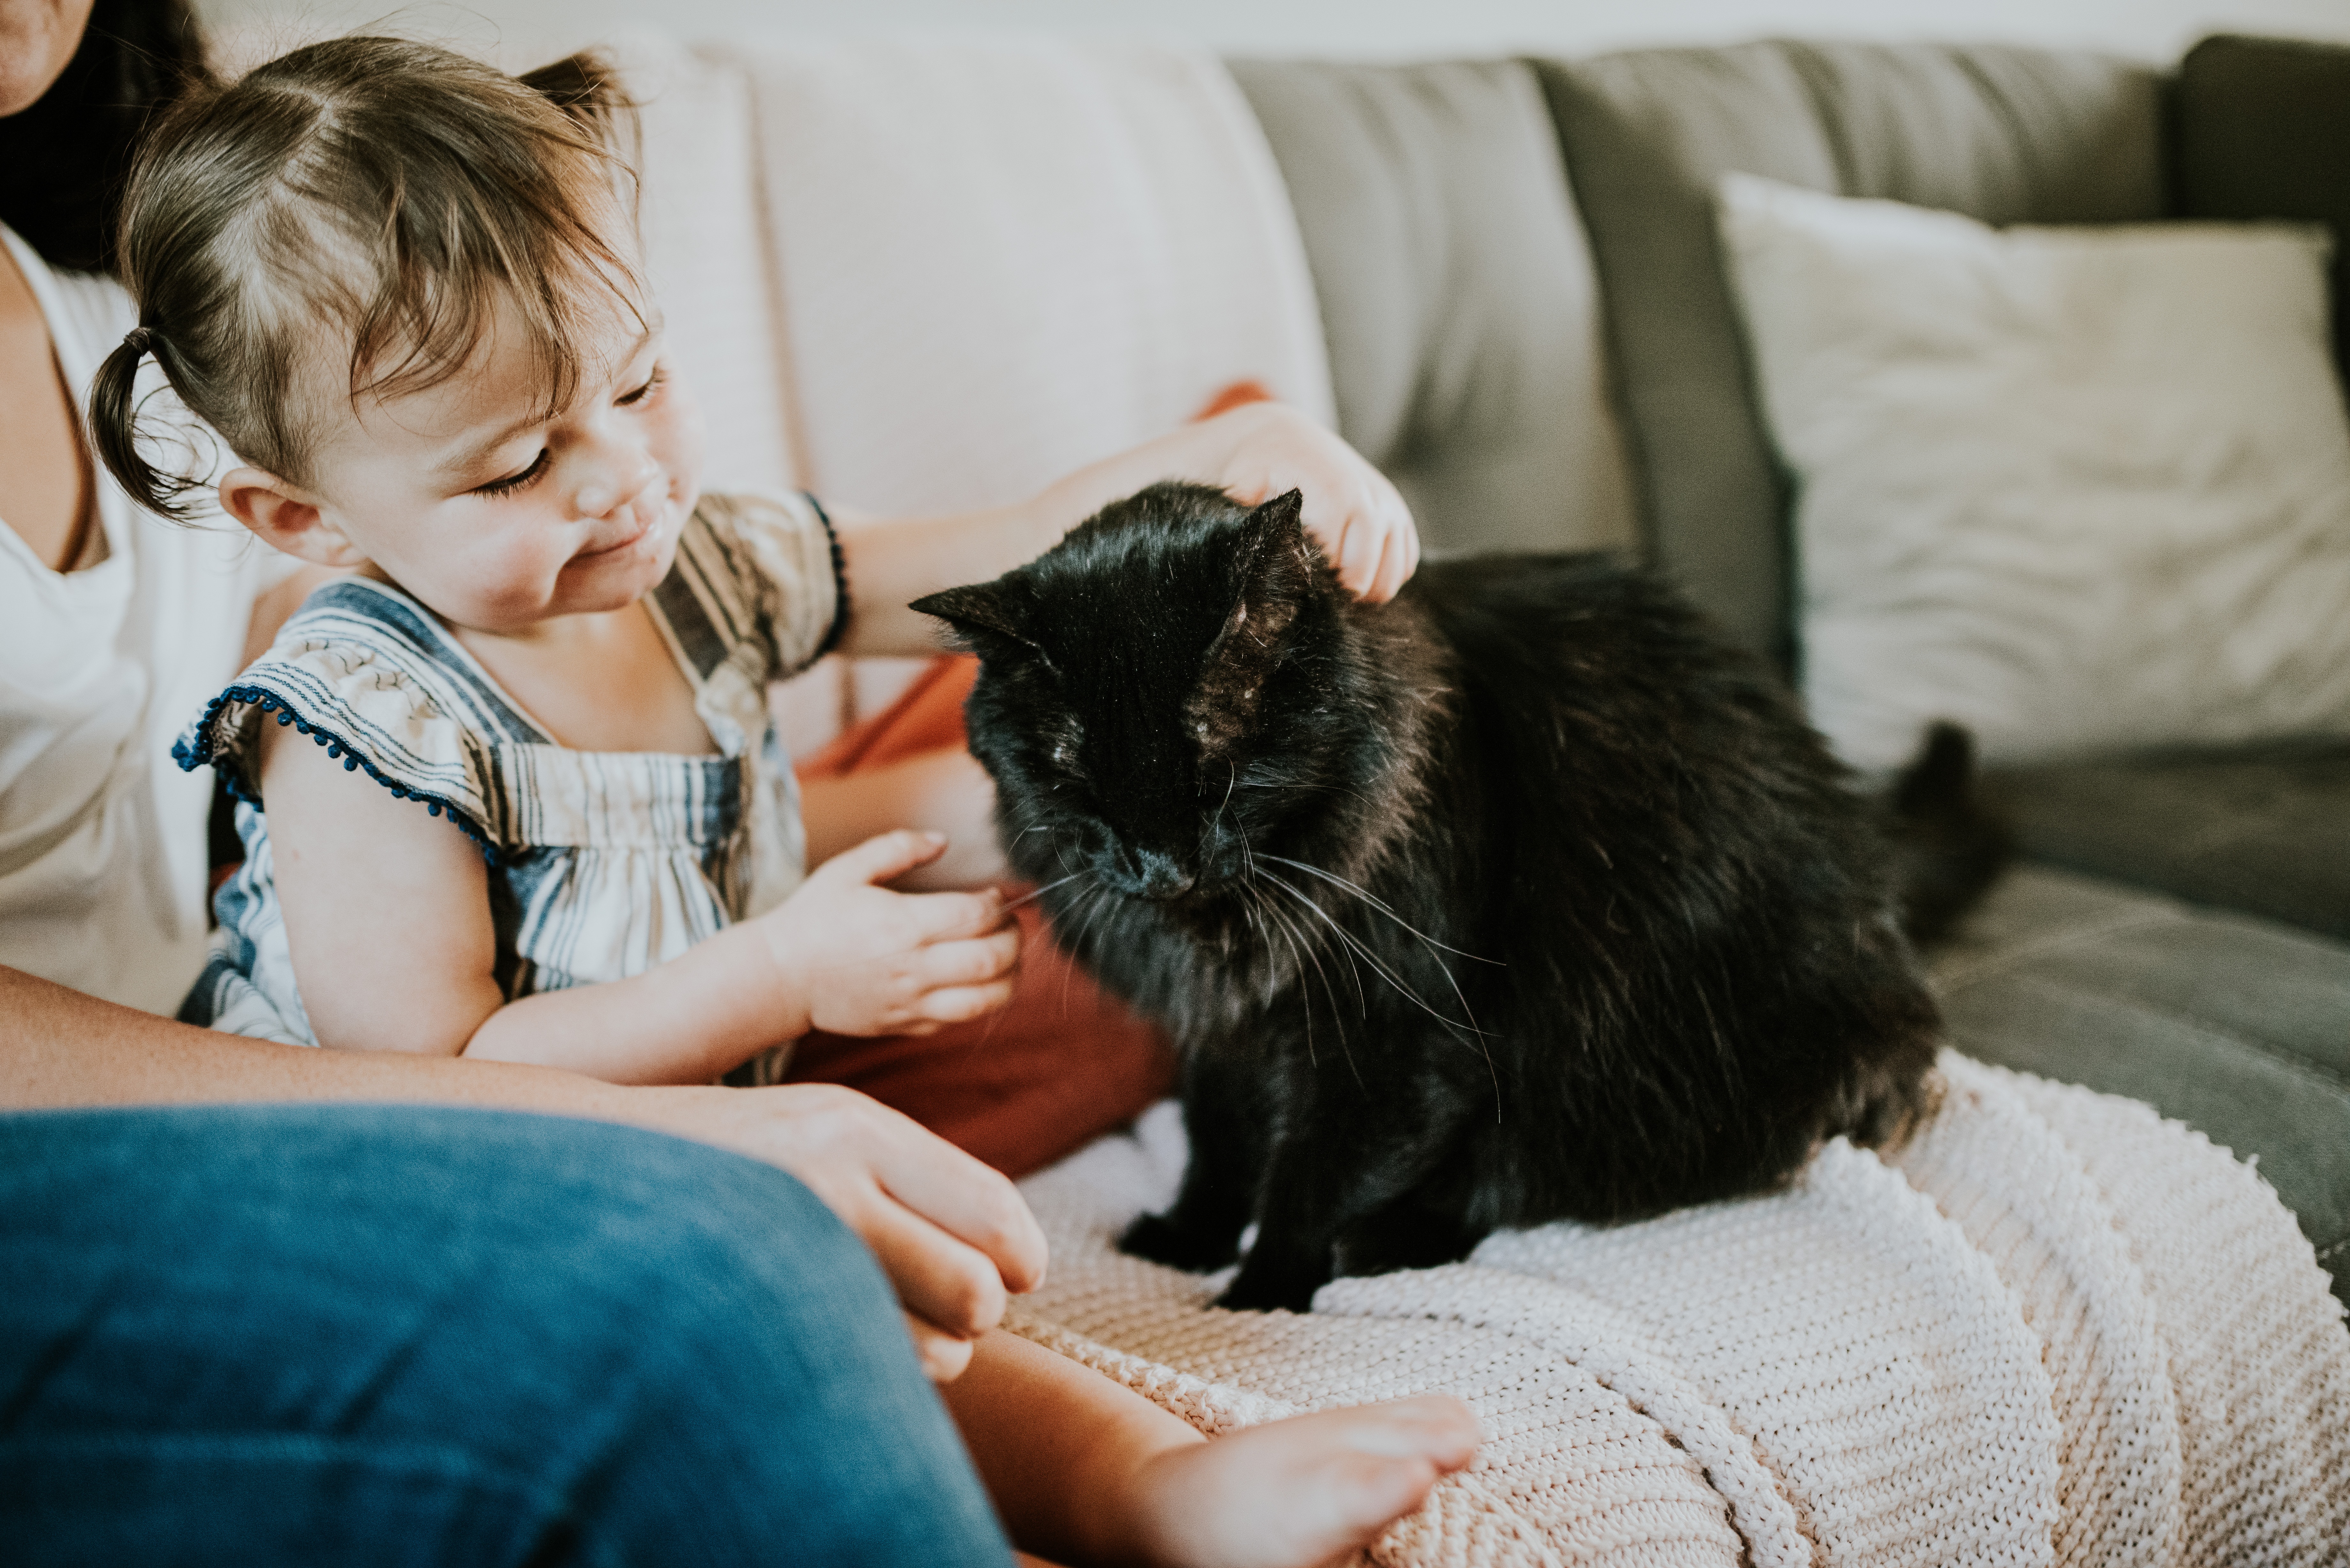 Young child petting black cat with adult sitting nearby.